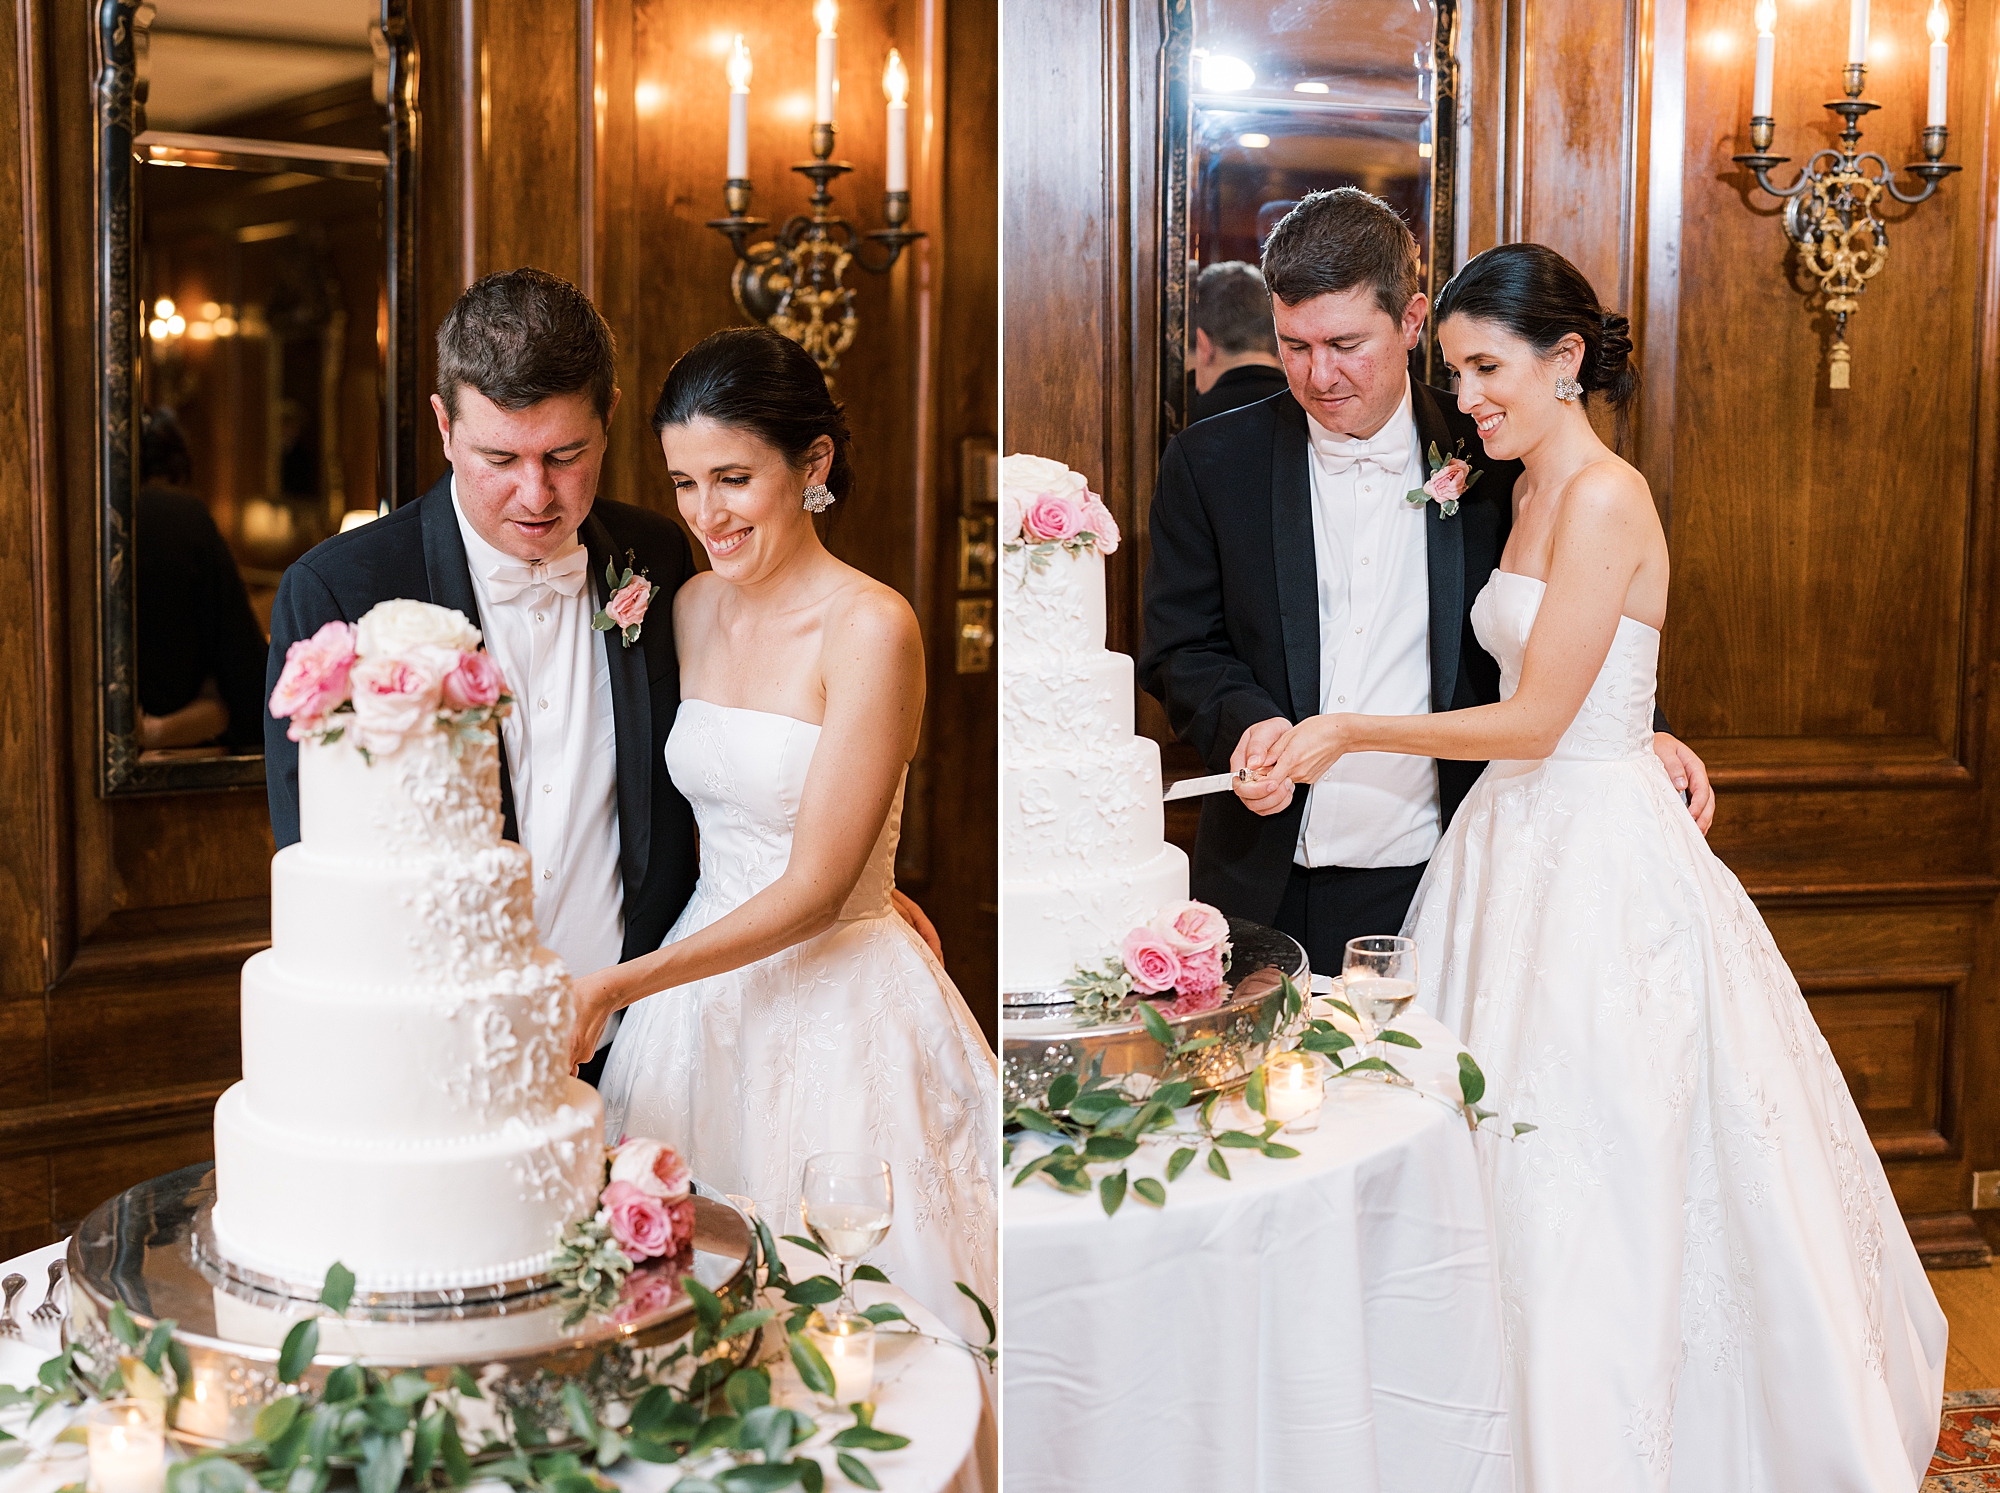 newlyweds cut wedding cake at Greenville Country Club